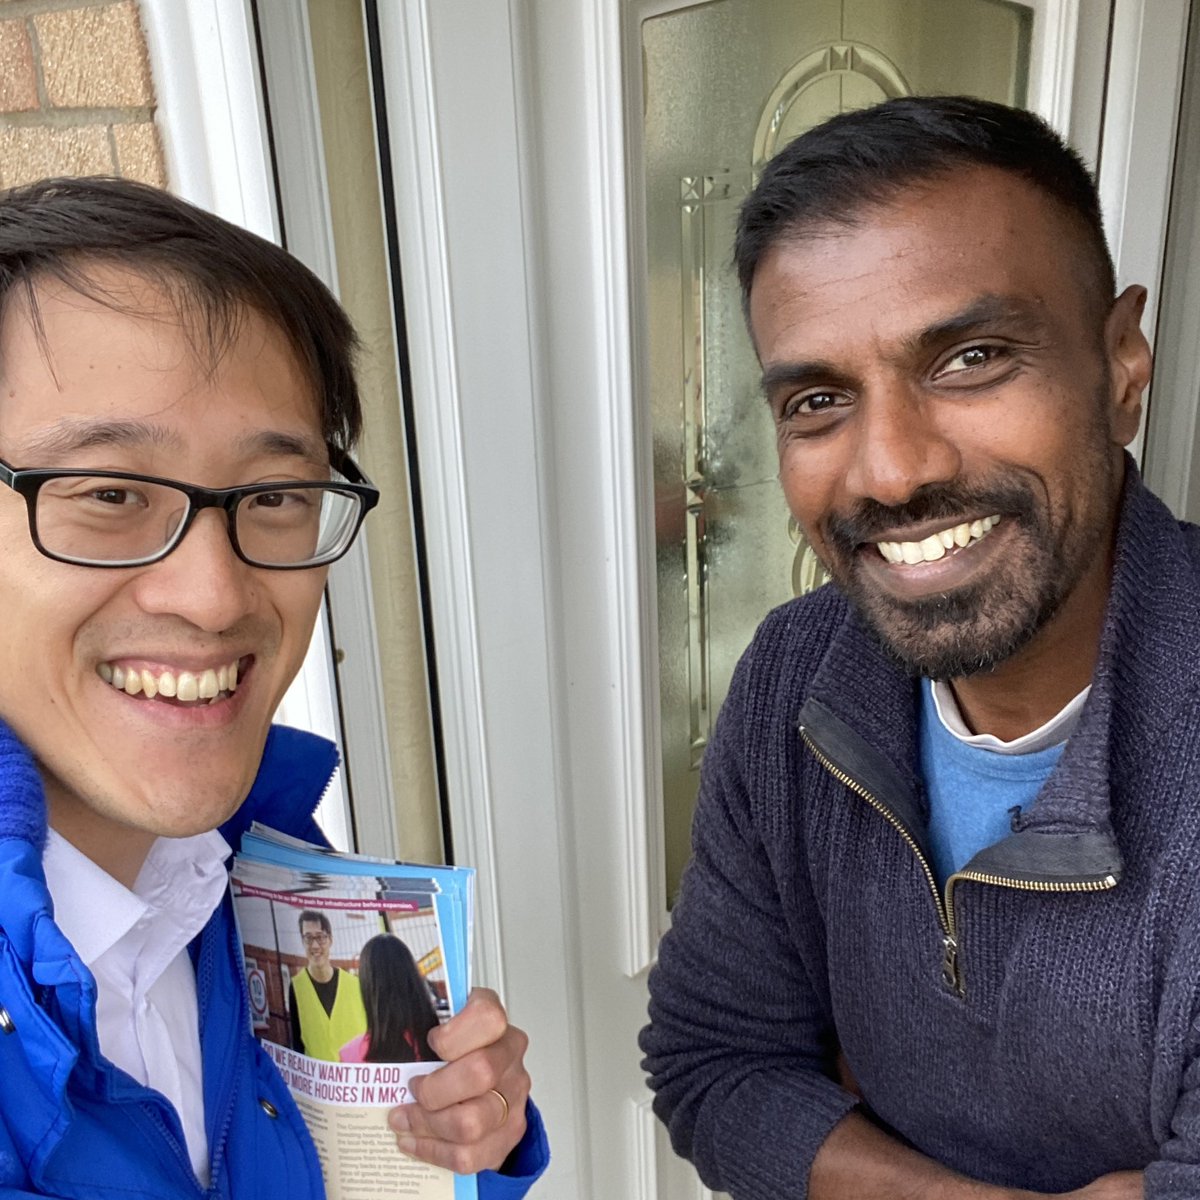 Another 200 doors knocked. Pretty routine for us. It’s encouraging to see the positive name recognition being built with local residents. @MKConservatives